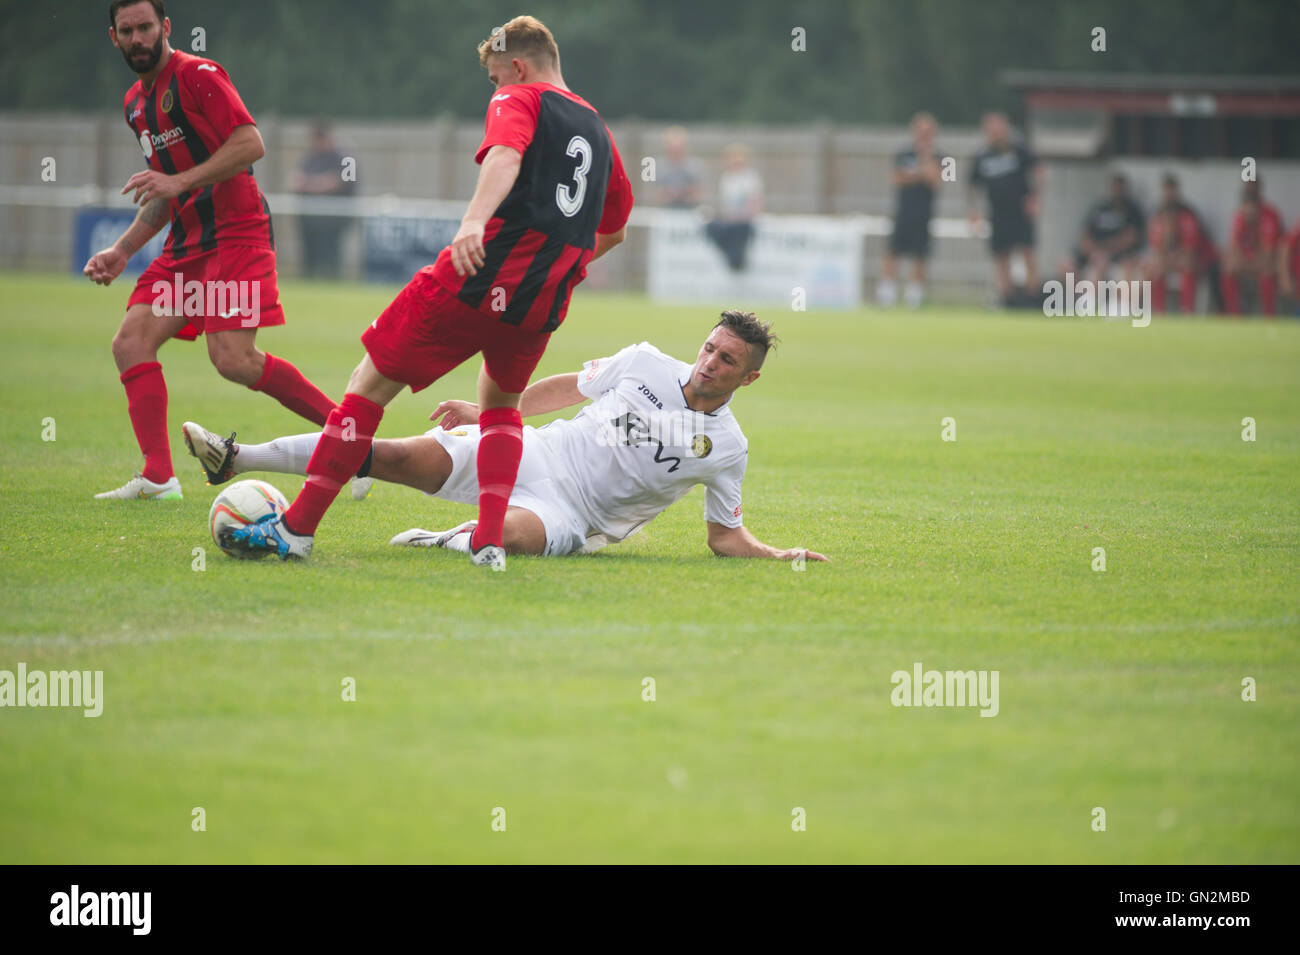 UK. 27th August, 2016. Evo-Stik Division 1 South and West; Winchester FC v Tiverton Town FC. Winchester's King slide tackled Credit:  Flashspix/Alamy Live News Stock Photo